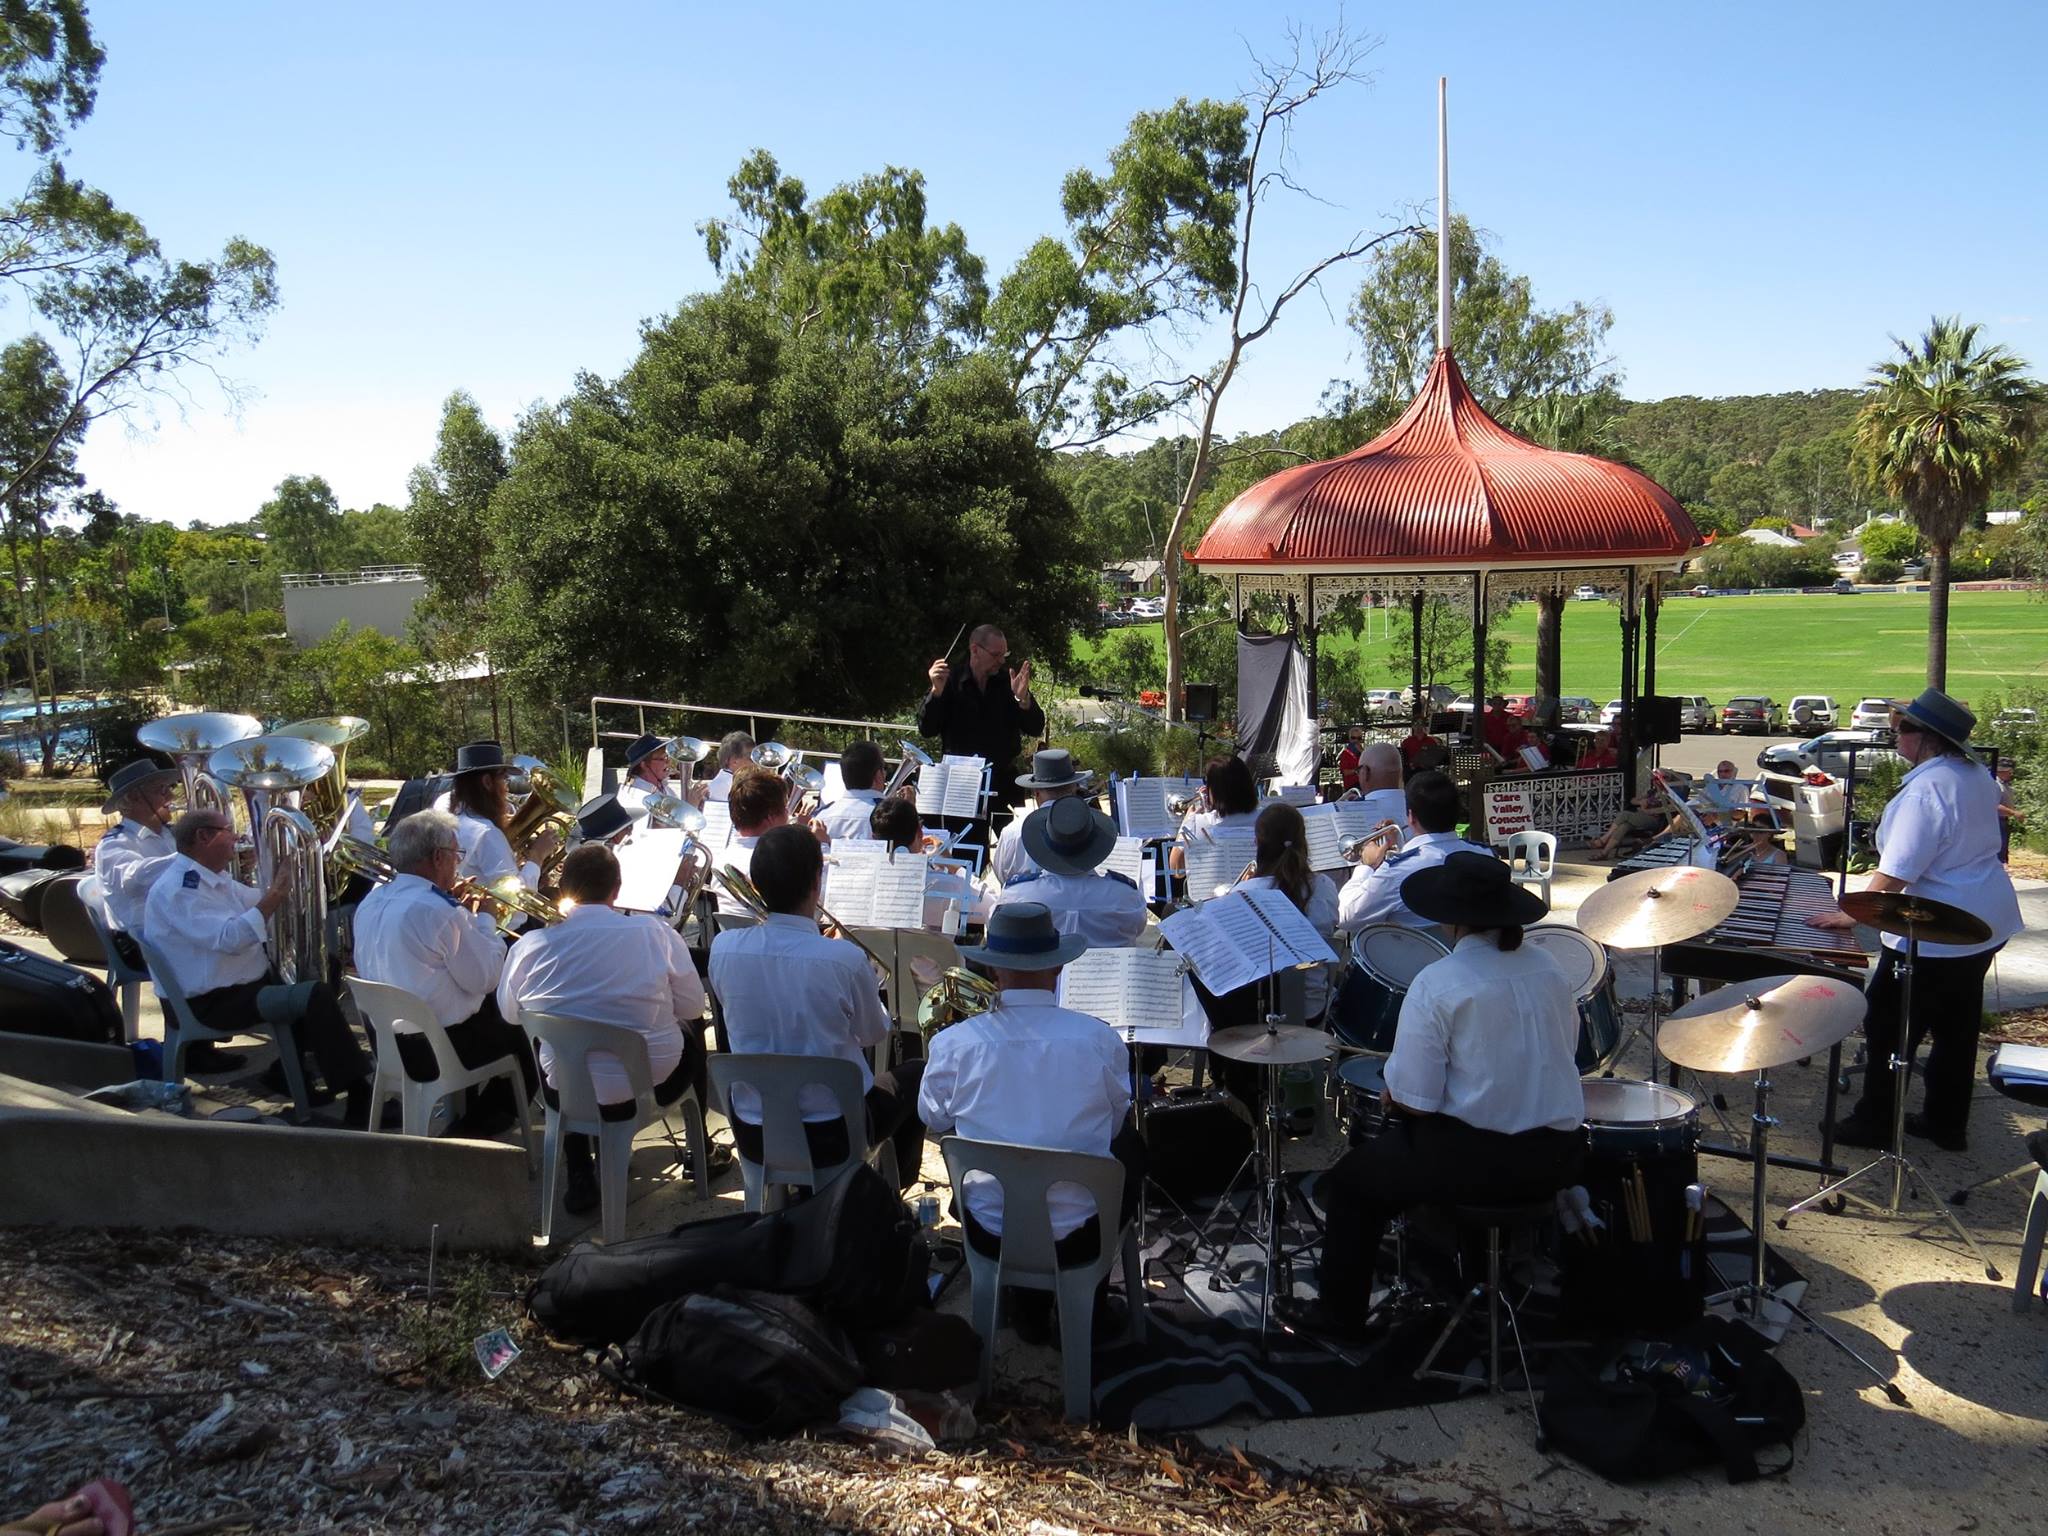 Combined concert with the Clare Valley Concert Band